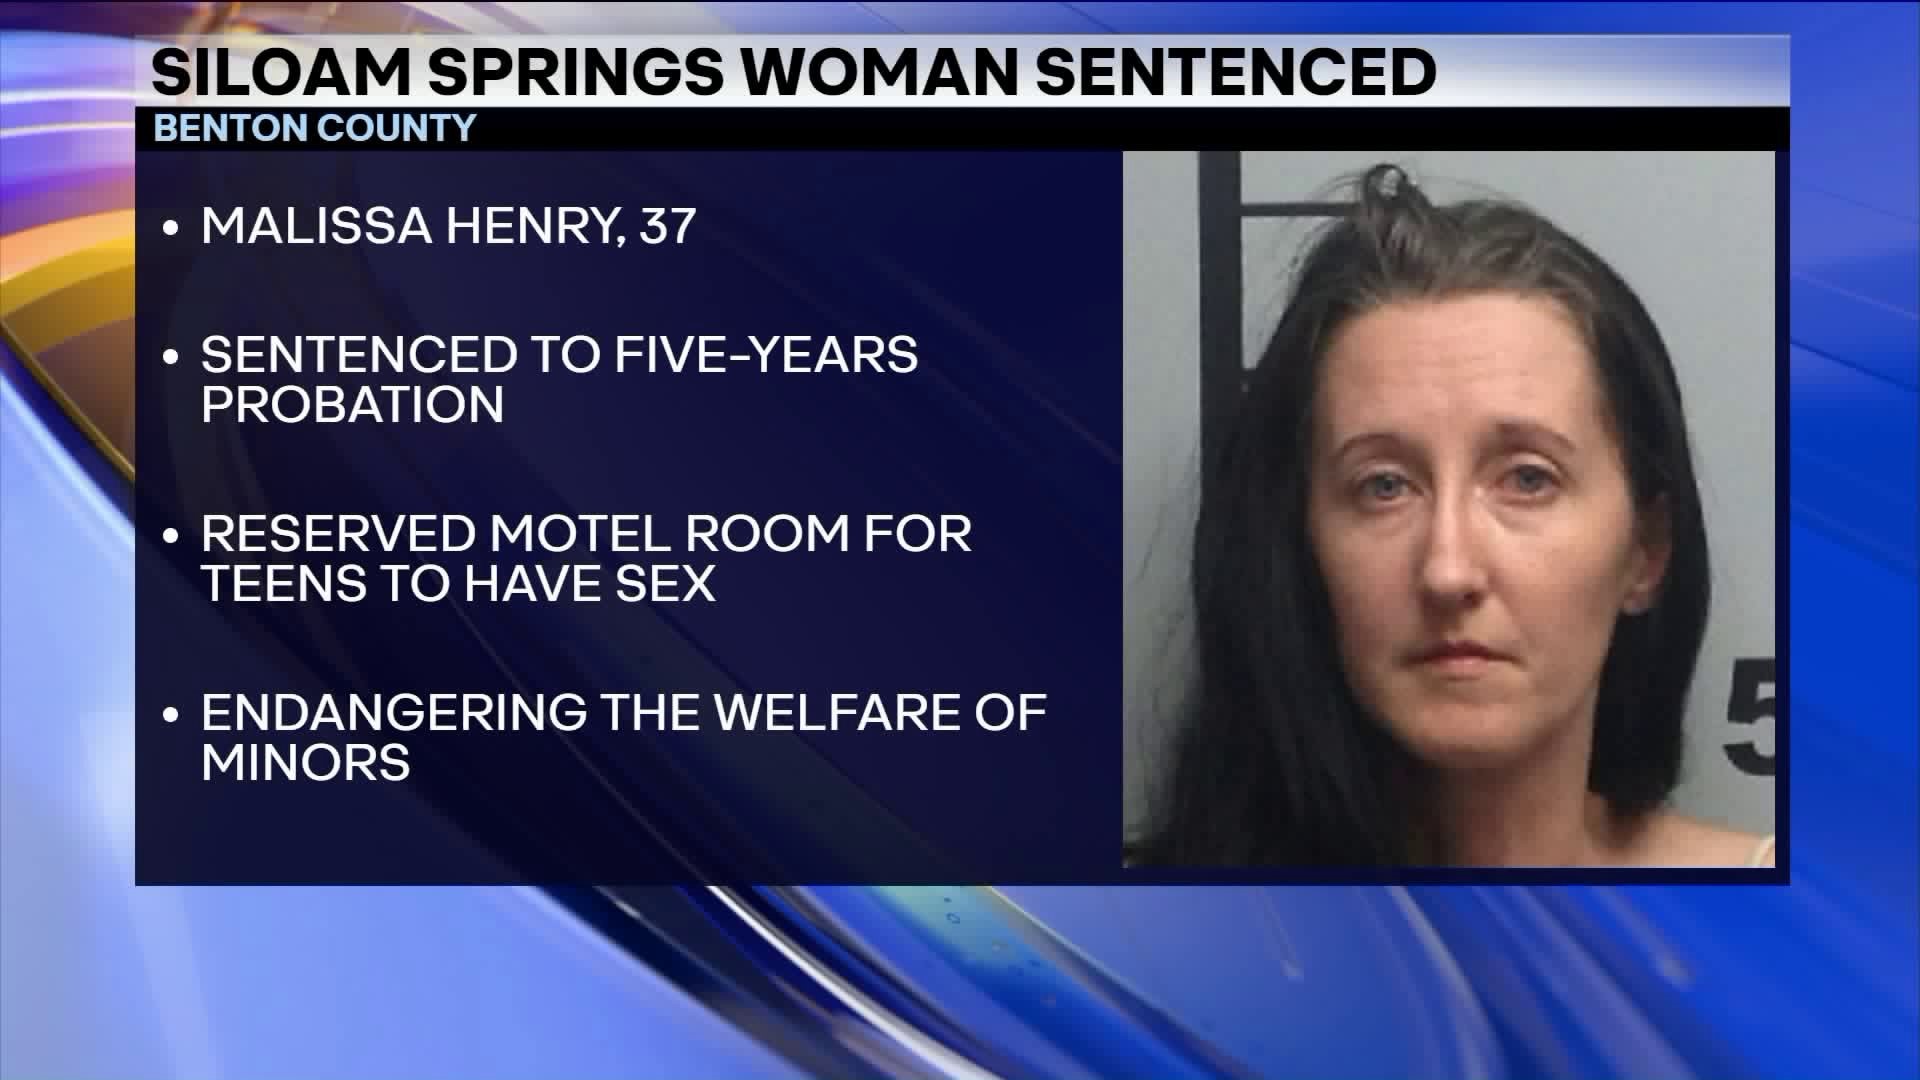 Woman Sentenced for Reserving Motel Room for Underage Teens